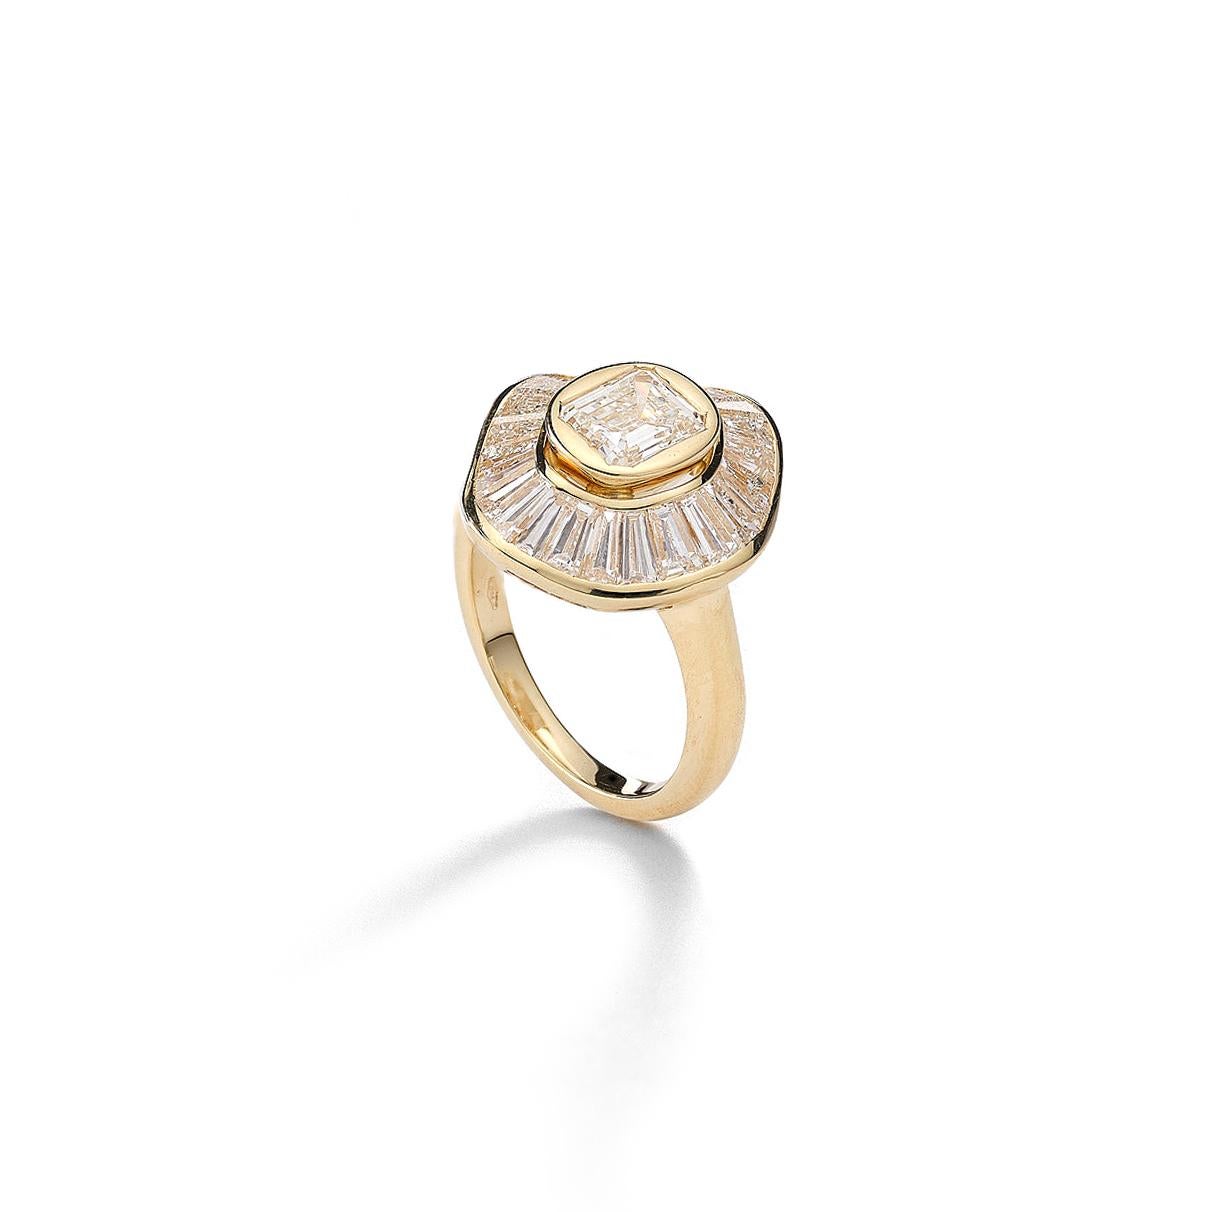 Ring in yellow gold 18kt set with one emerald cut diamond 1.17 cts and 24 baguette cut diamonds 2.55 Size 53  